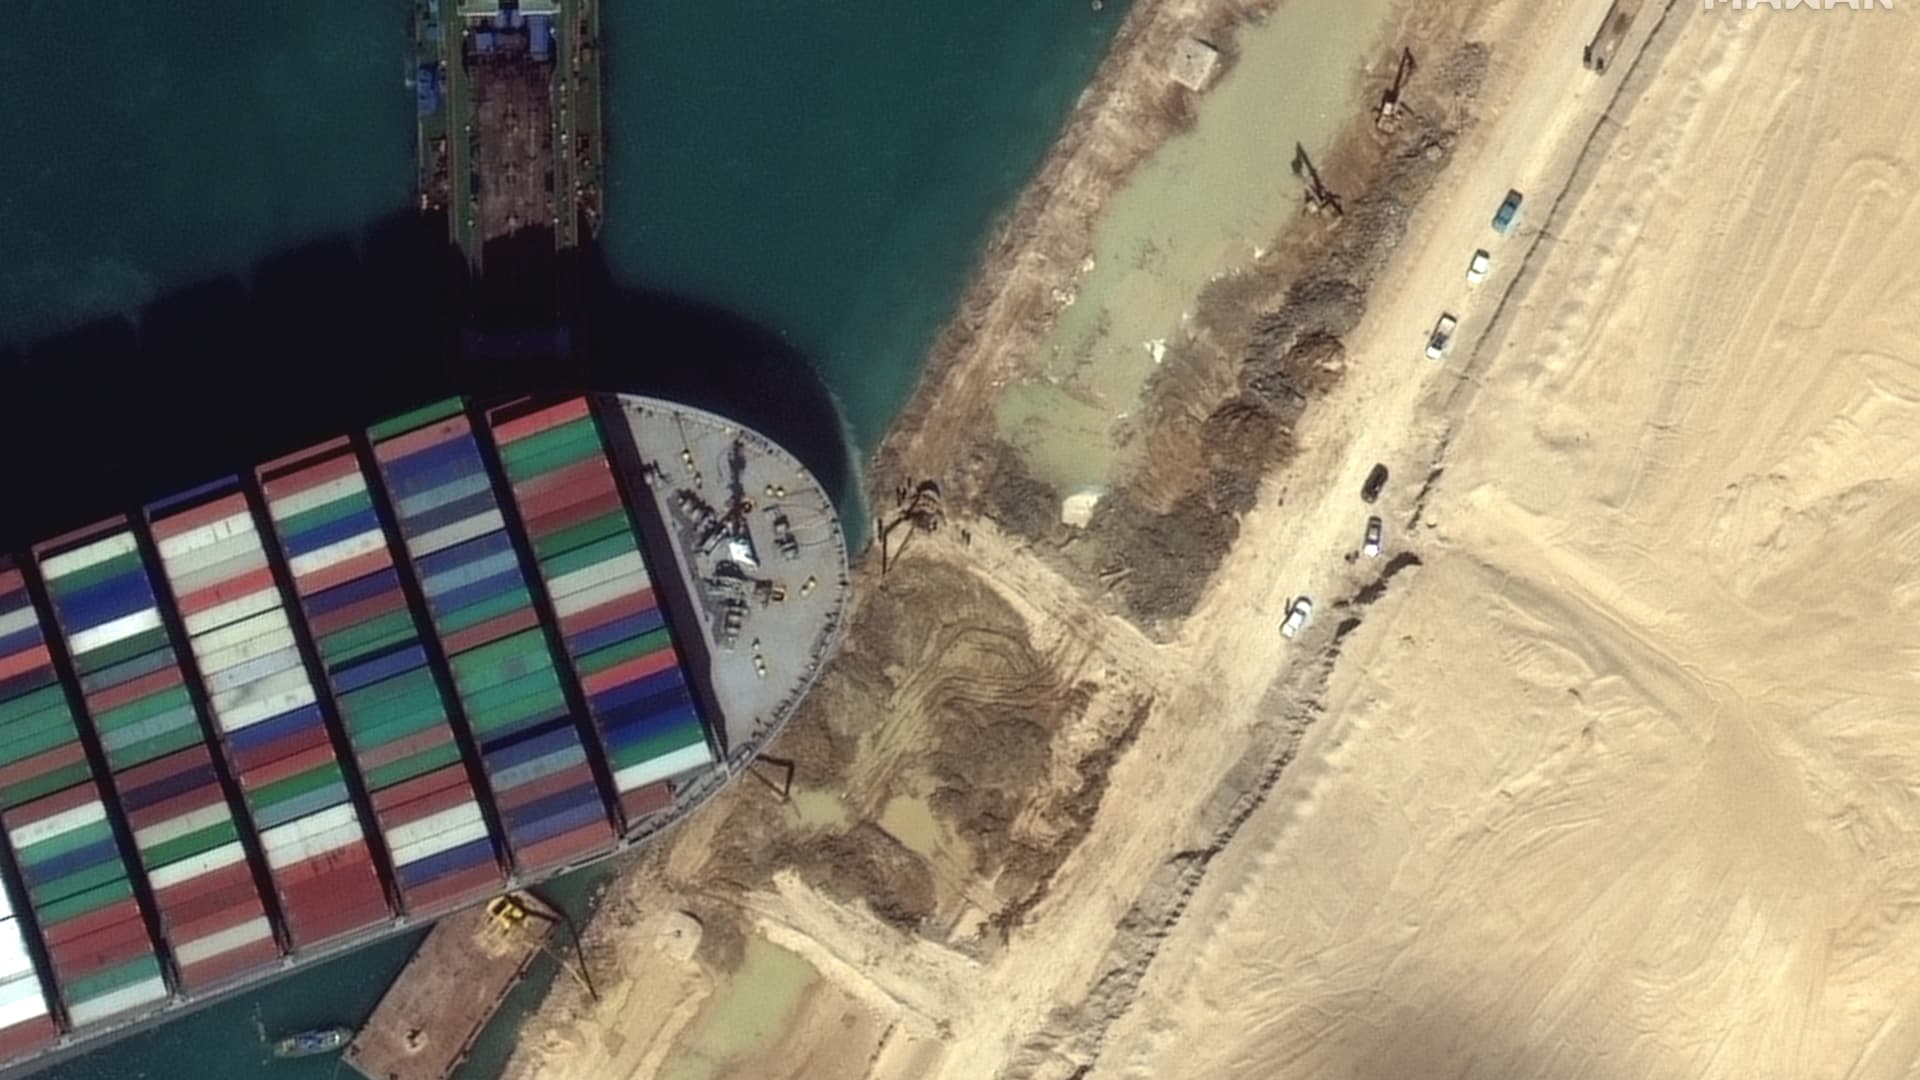 Close up imagery of the dredging operations underway around the Ever Given in the Suez Canal, captured by the company's WorldView-3 satellite on Saturday, March 27, 2021.